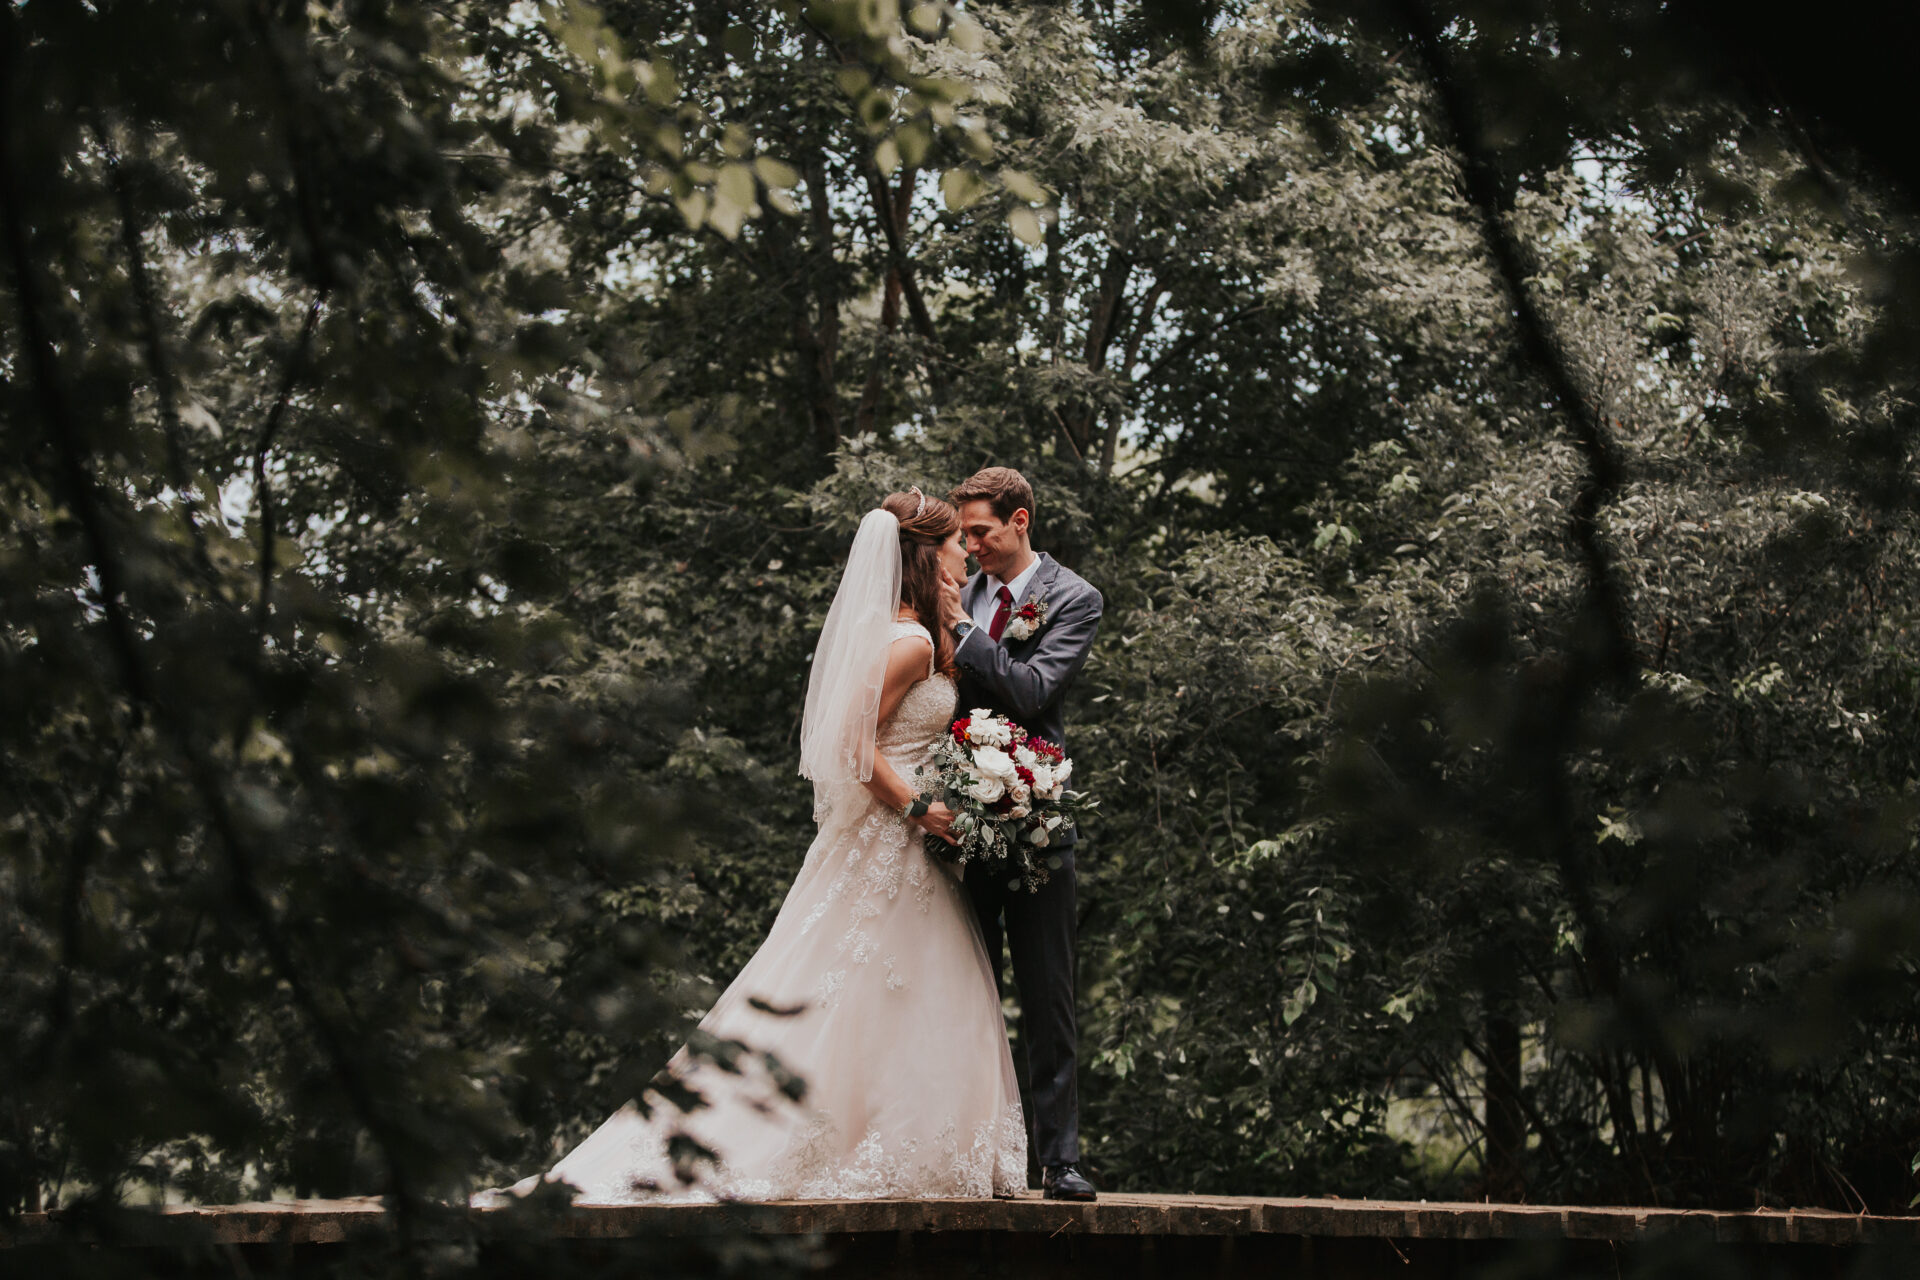 Bride and groom on a wood bridge surrounded by trees in summer